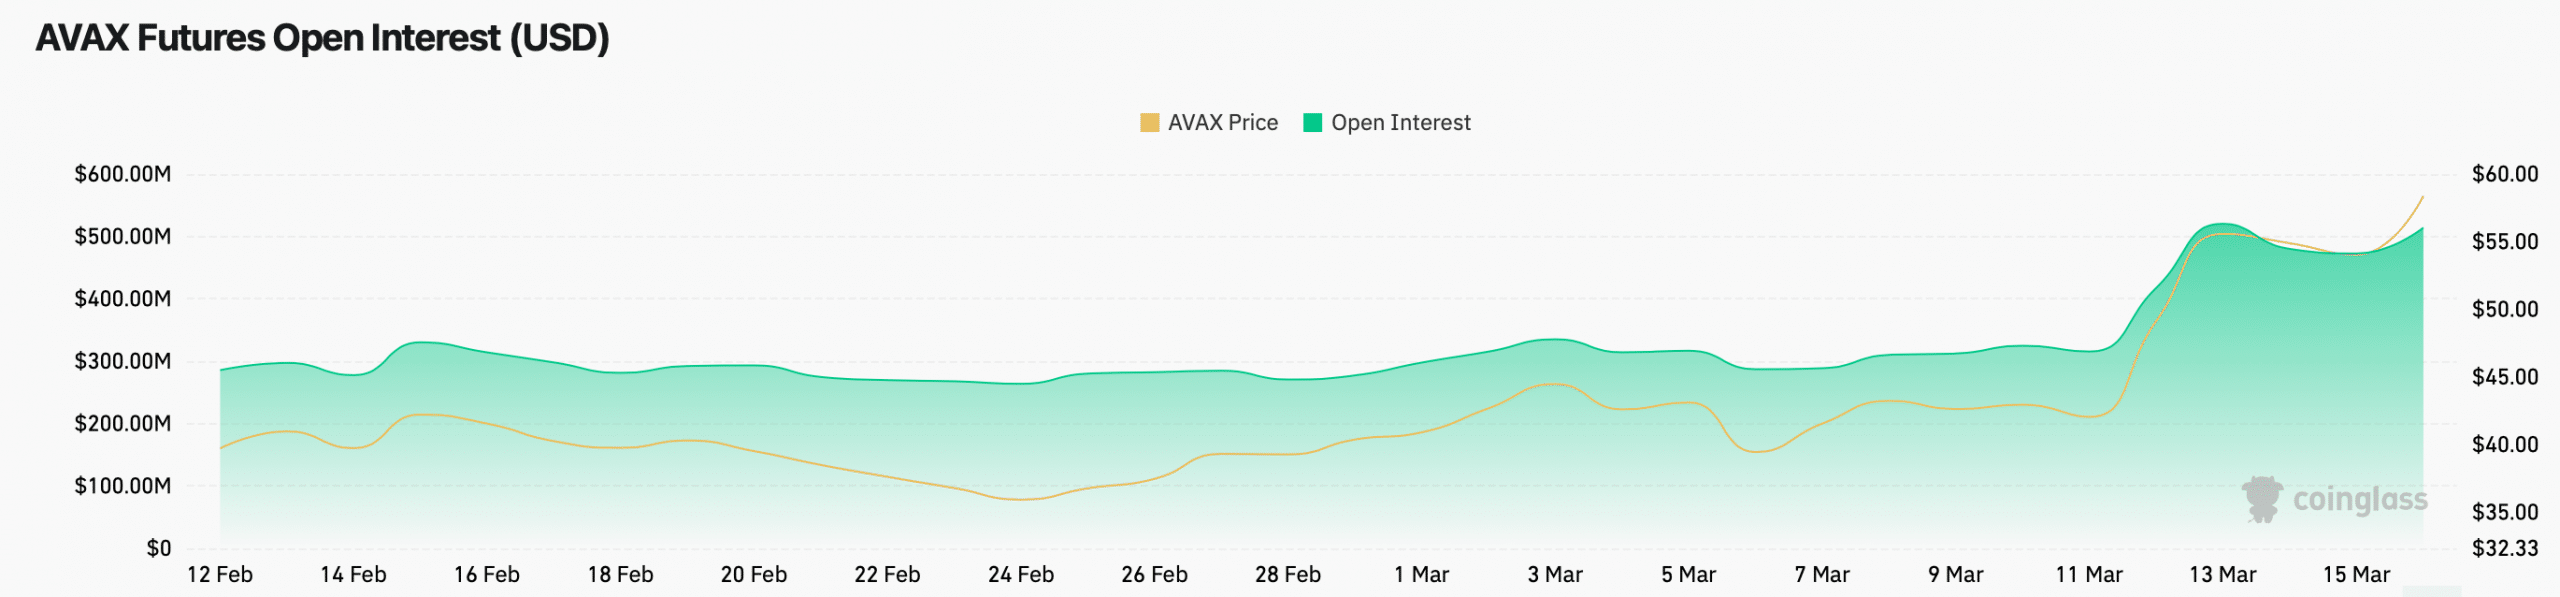 Avalanche's open interest rising 